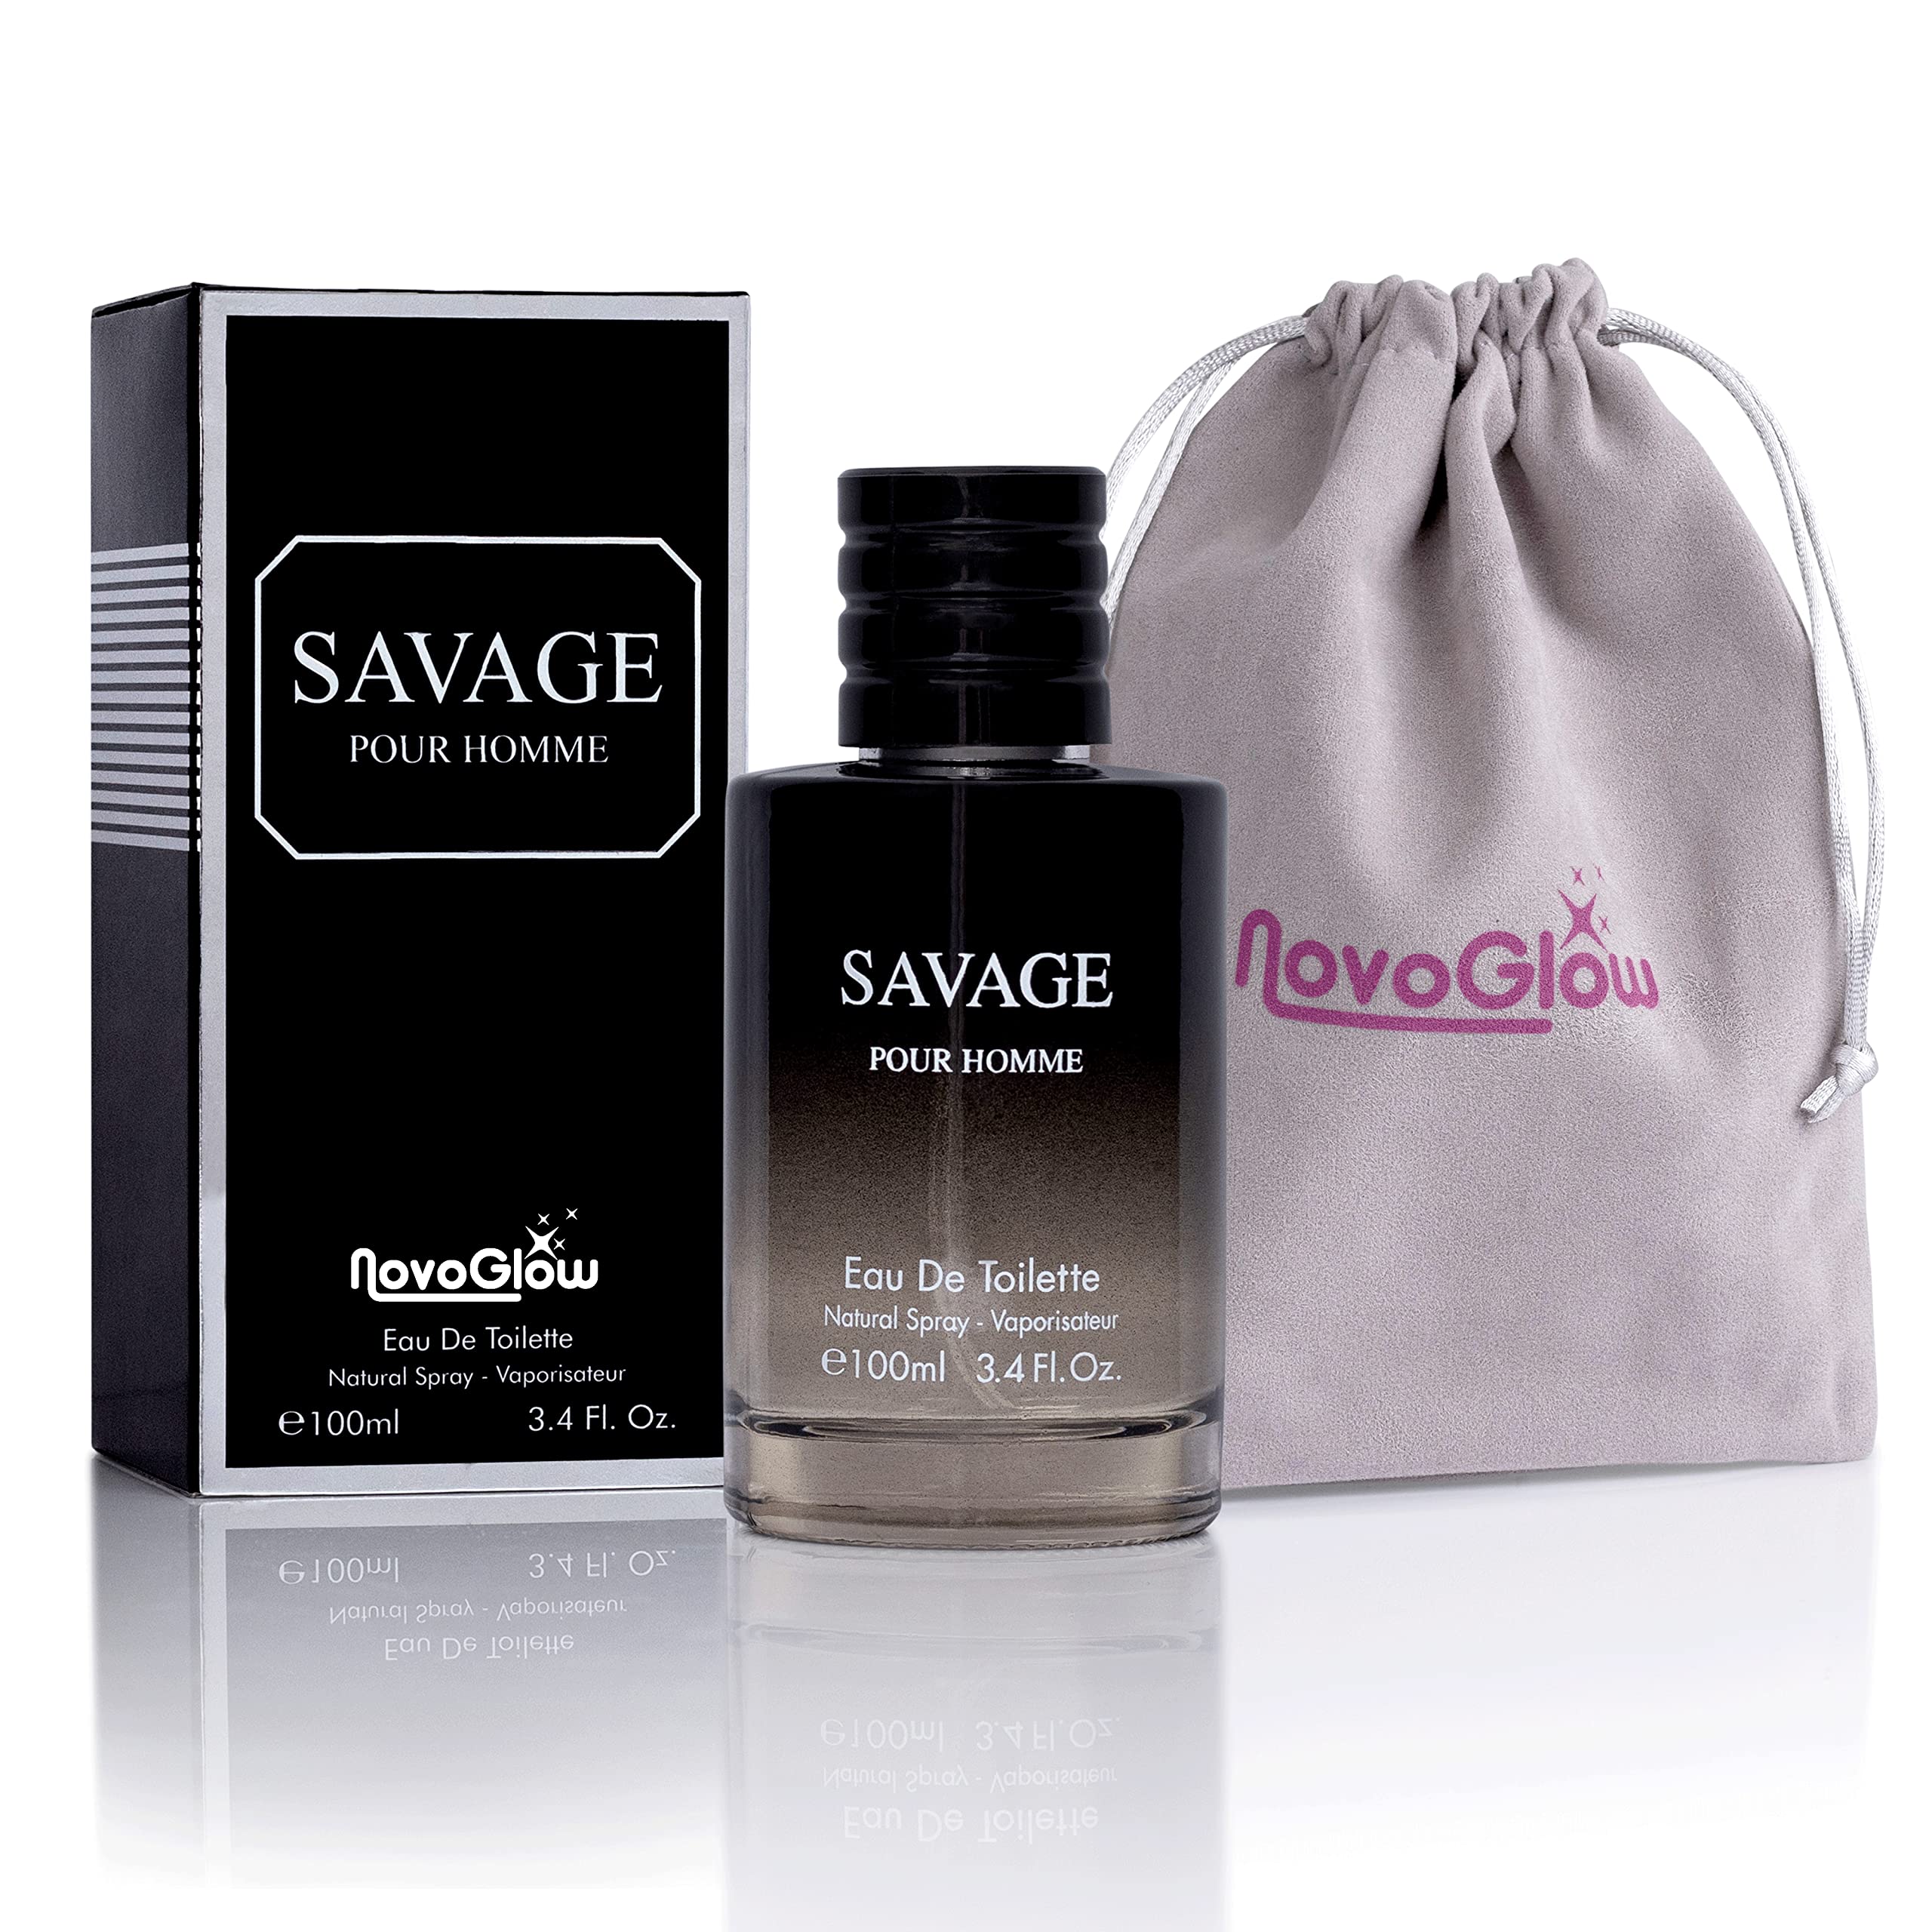 NovoGlow Savage for Men - 34 Oz Mens Eau De Toilette Spray - Refreshing & Warm Masculine Scent for Daily Use Mens casual cologne Includes